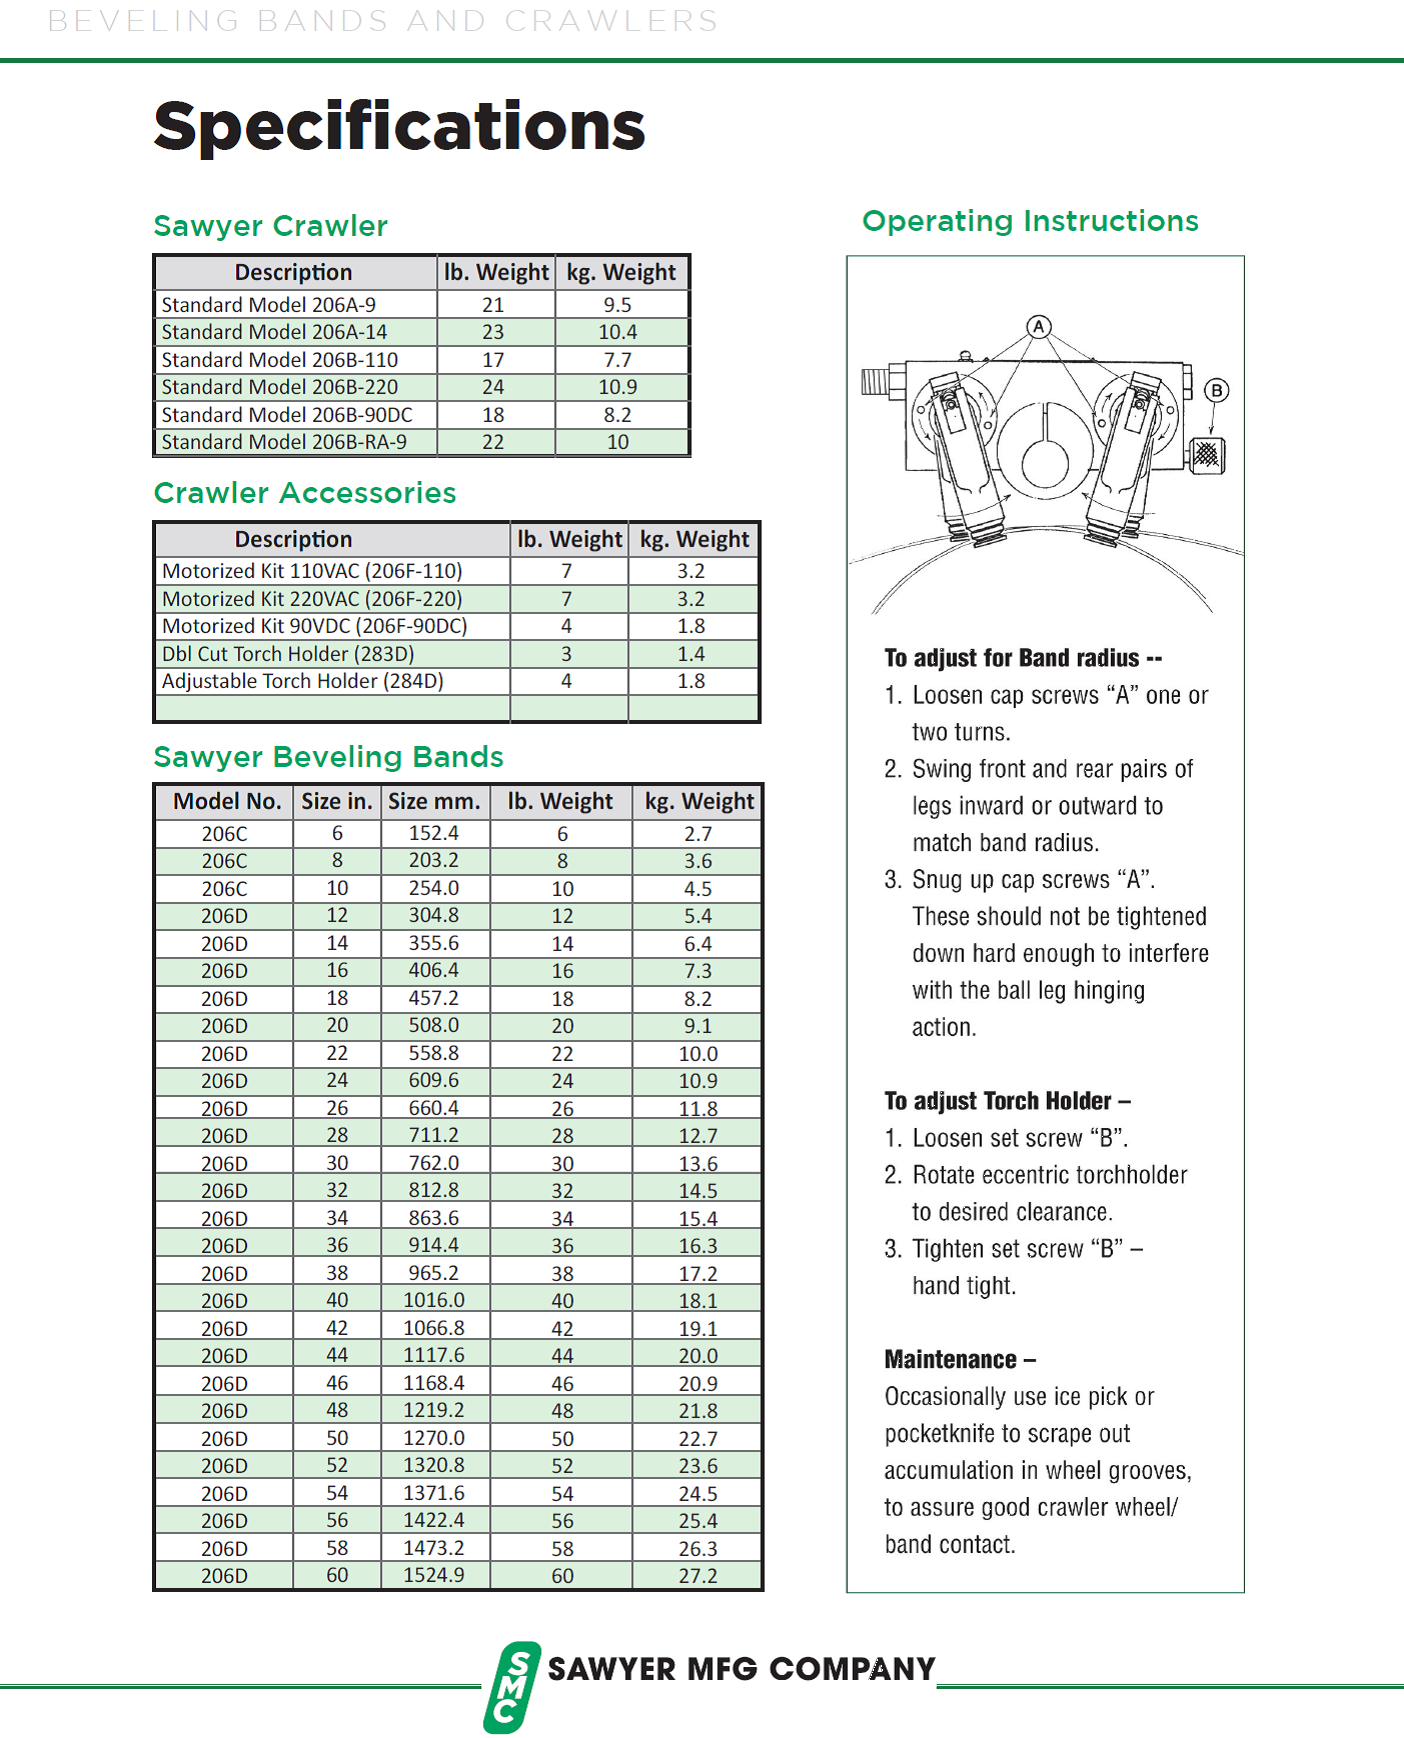 Specifications Sawyer beveling bands